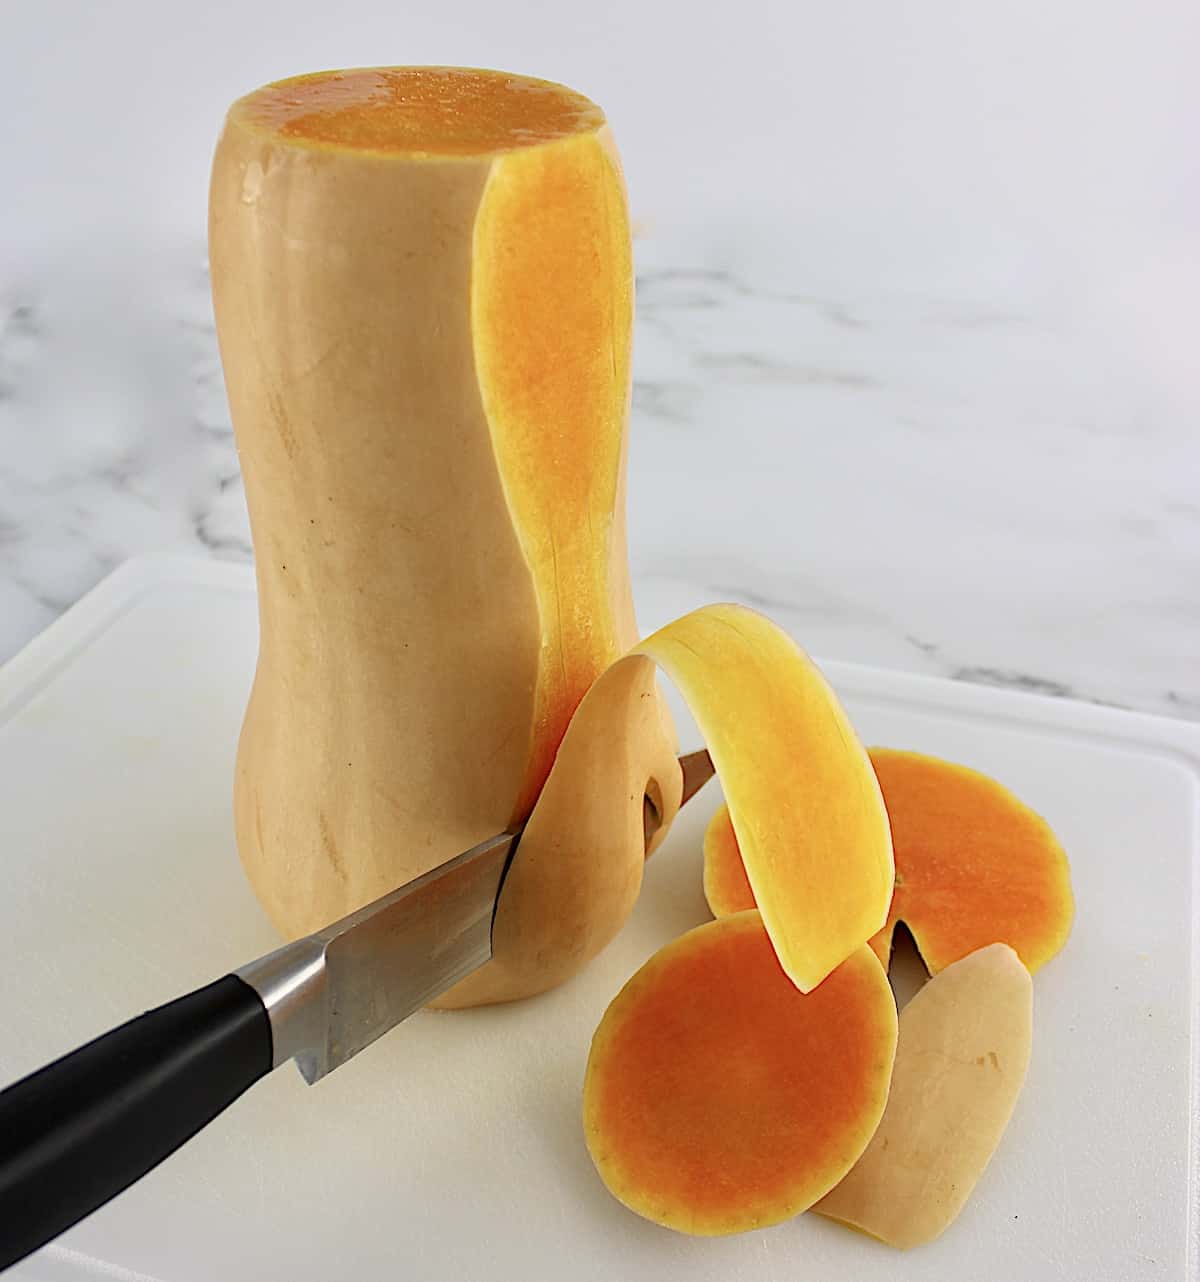 butternut squash being peeled on white cutting board with knife slicing downward